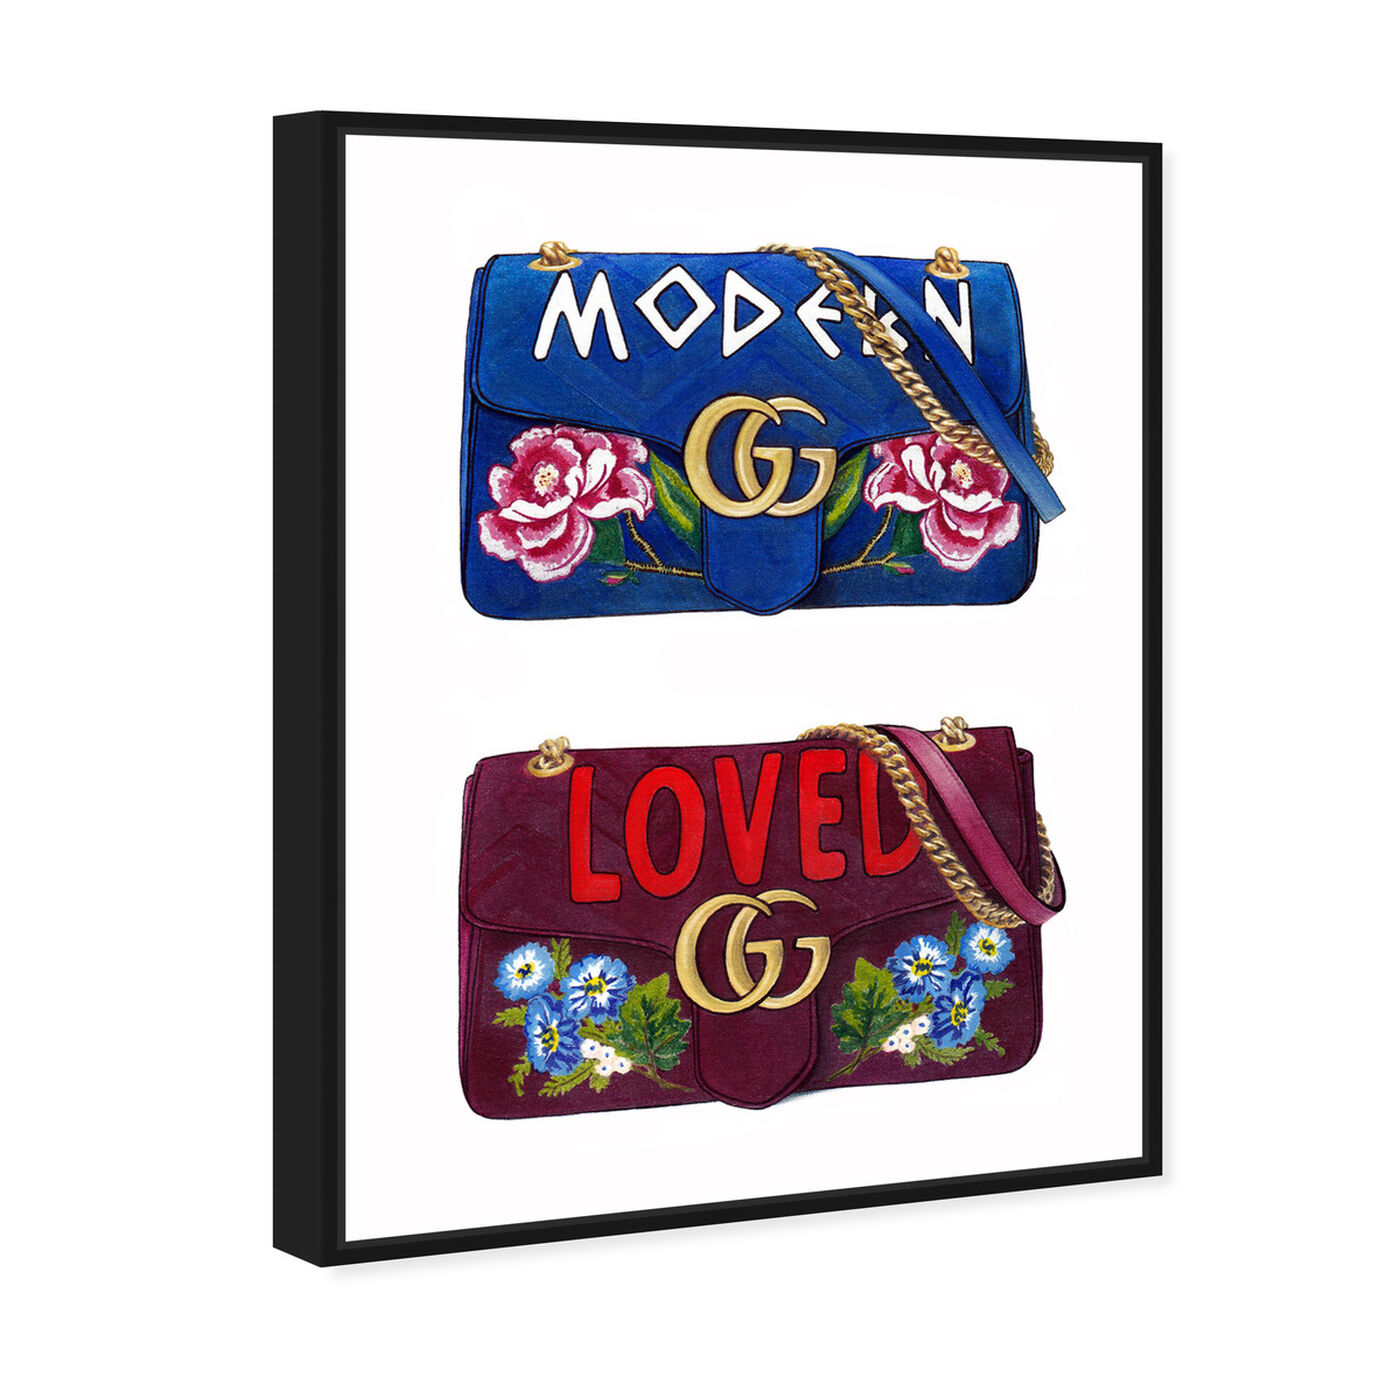 Angled view of Doll Memories - Lover featuring fashion and glam and handbags art.